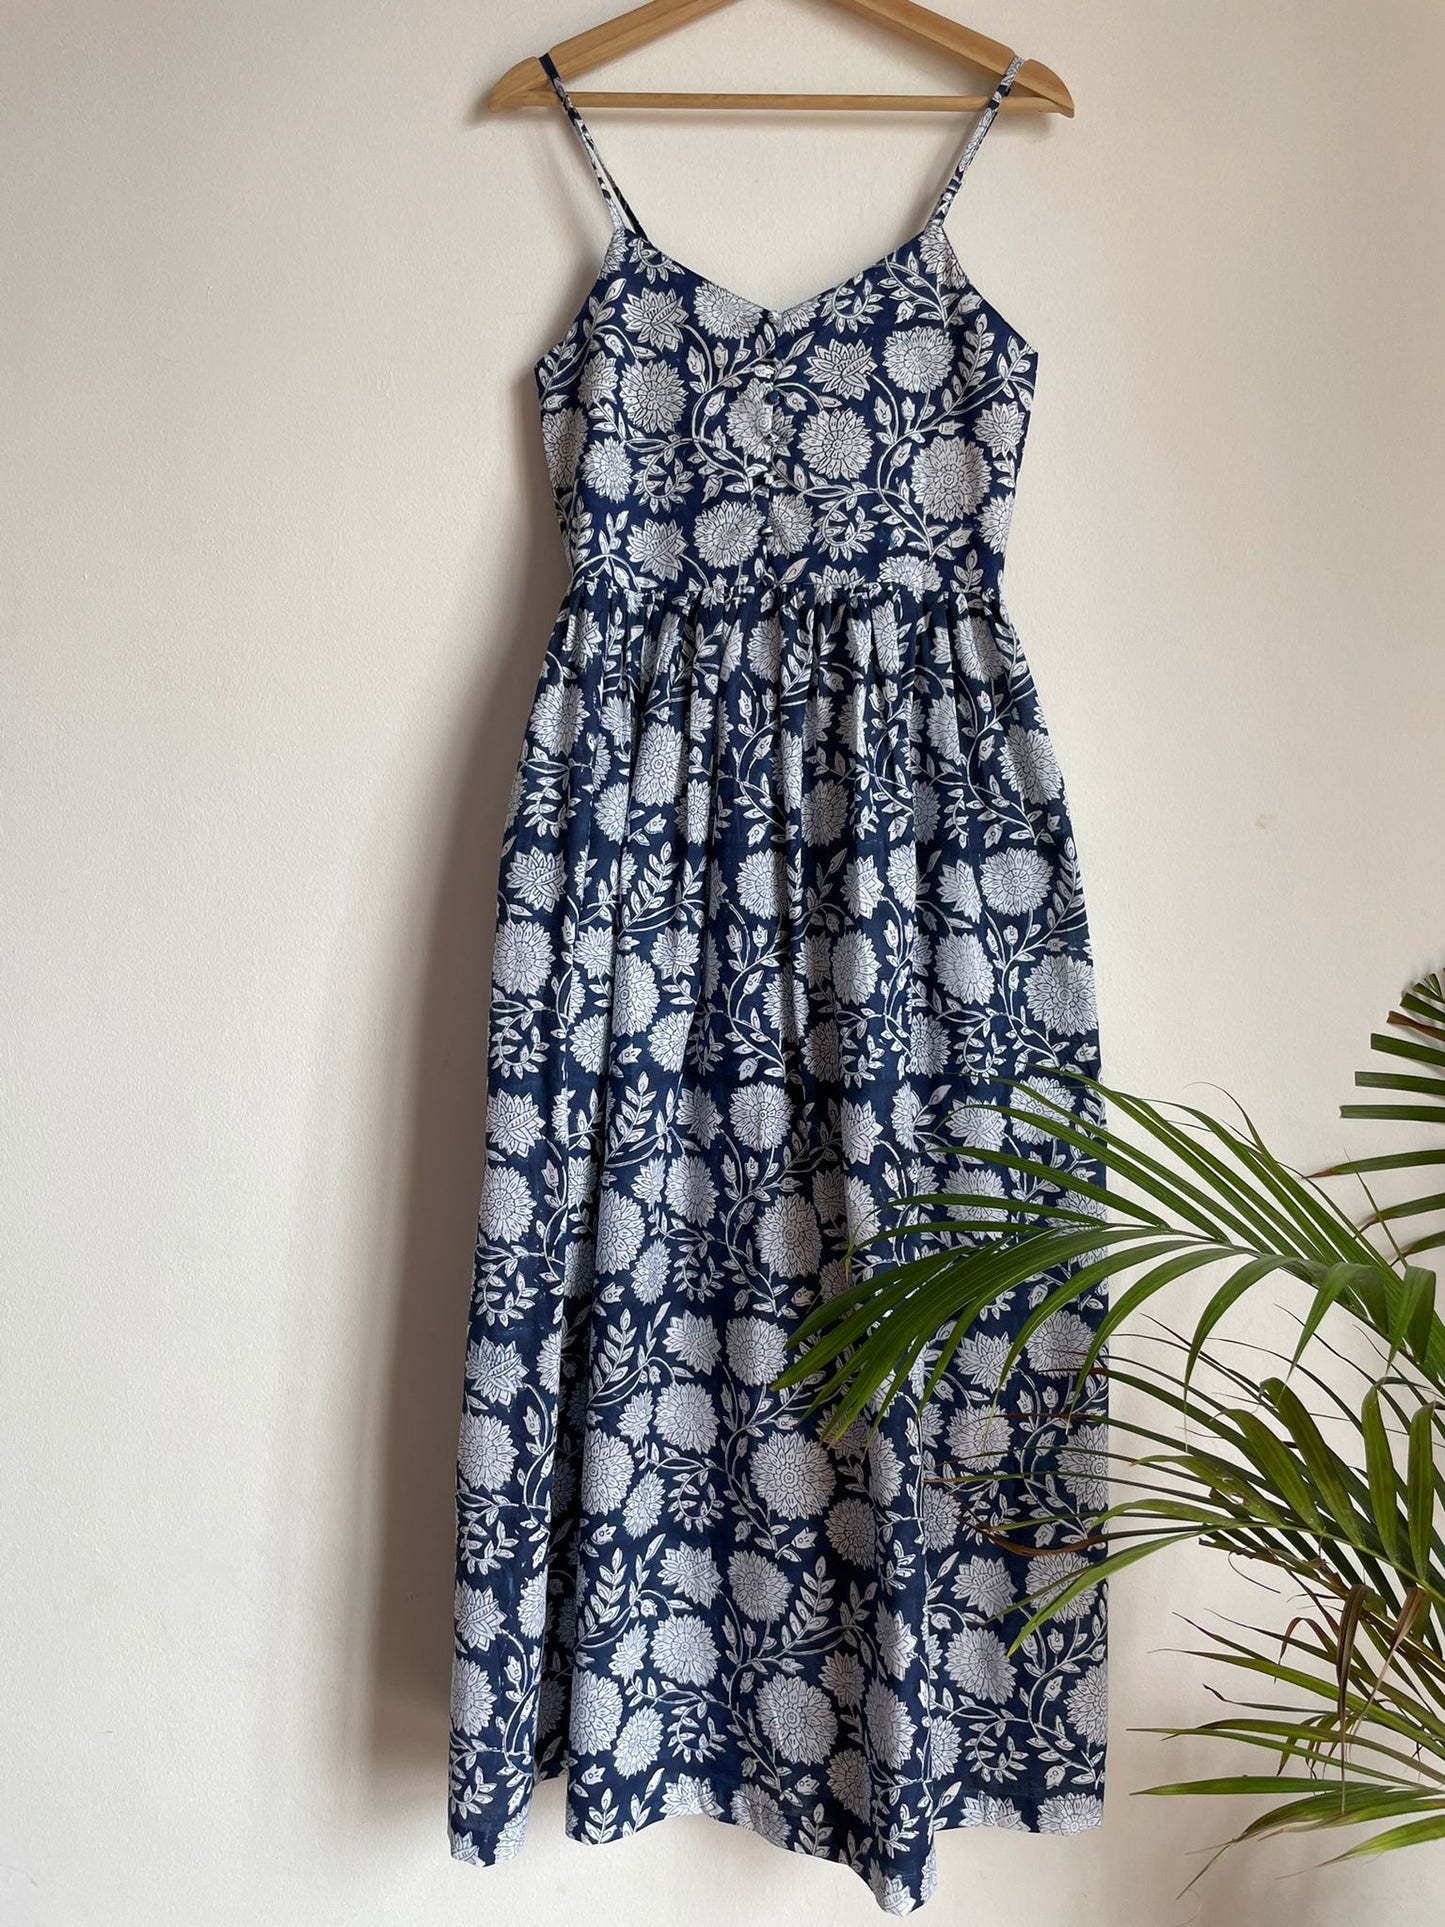 Blue maxi dress with noodle strap for women. Handmade in India